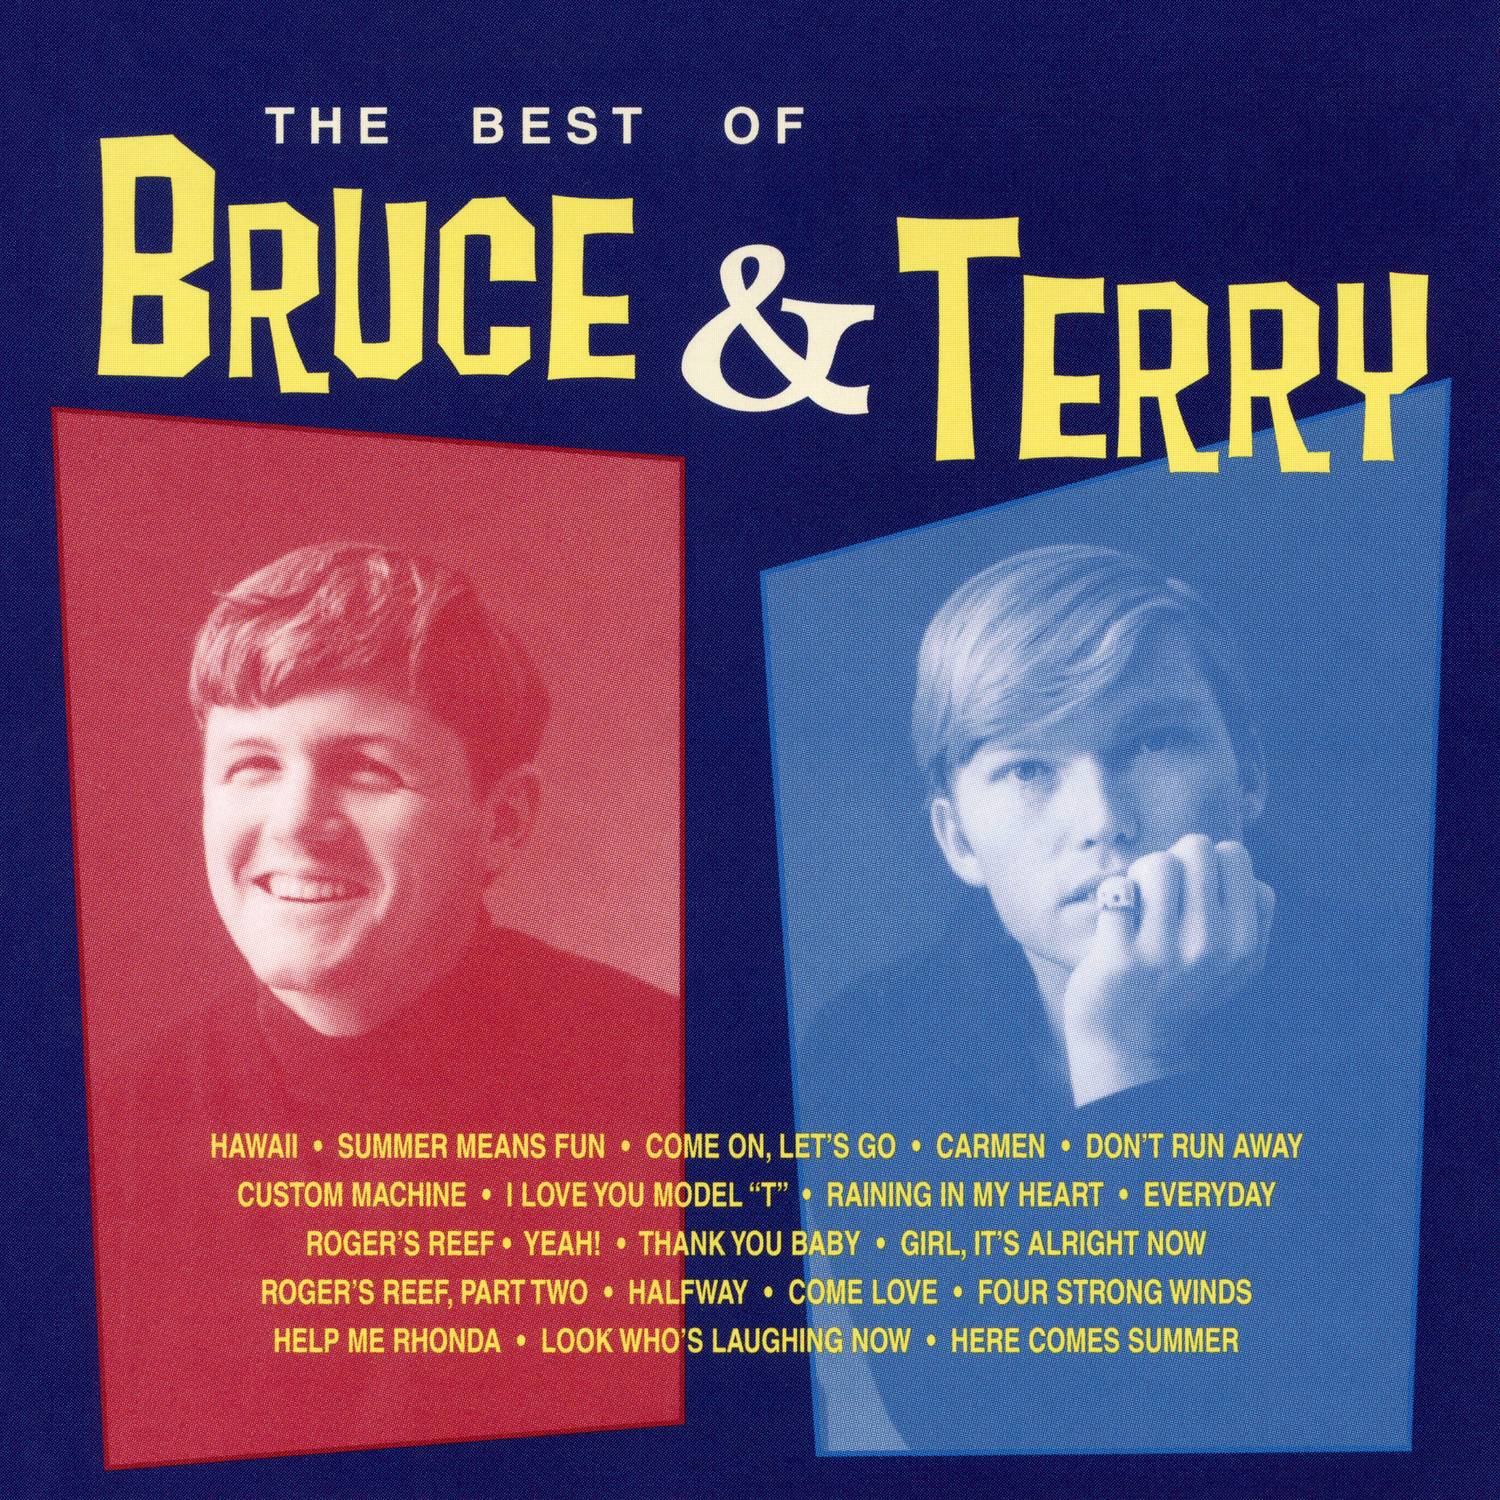 The Best of Bruce & Terry